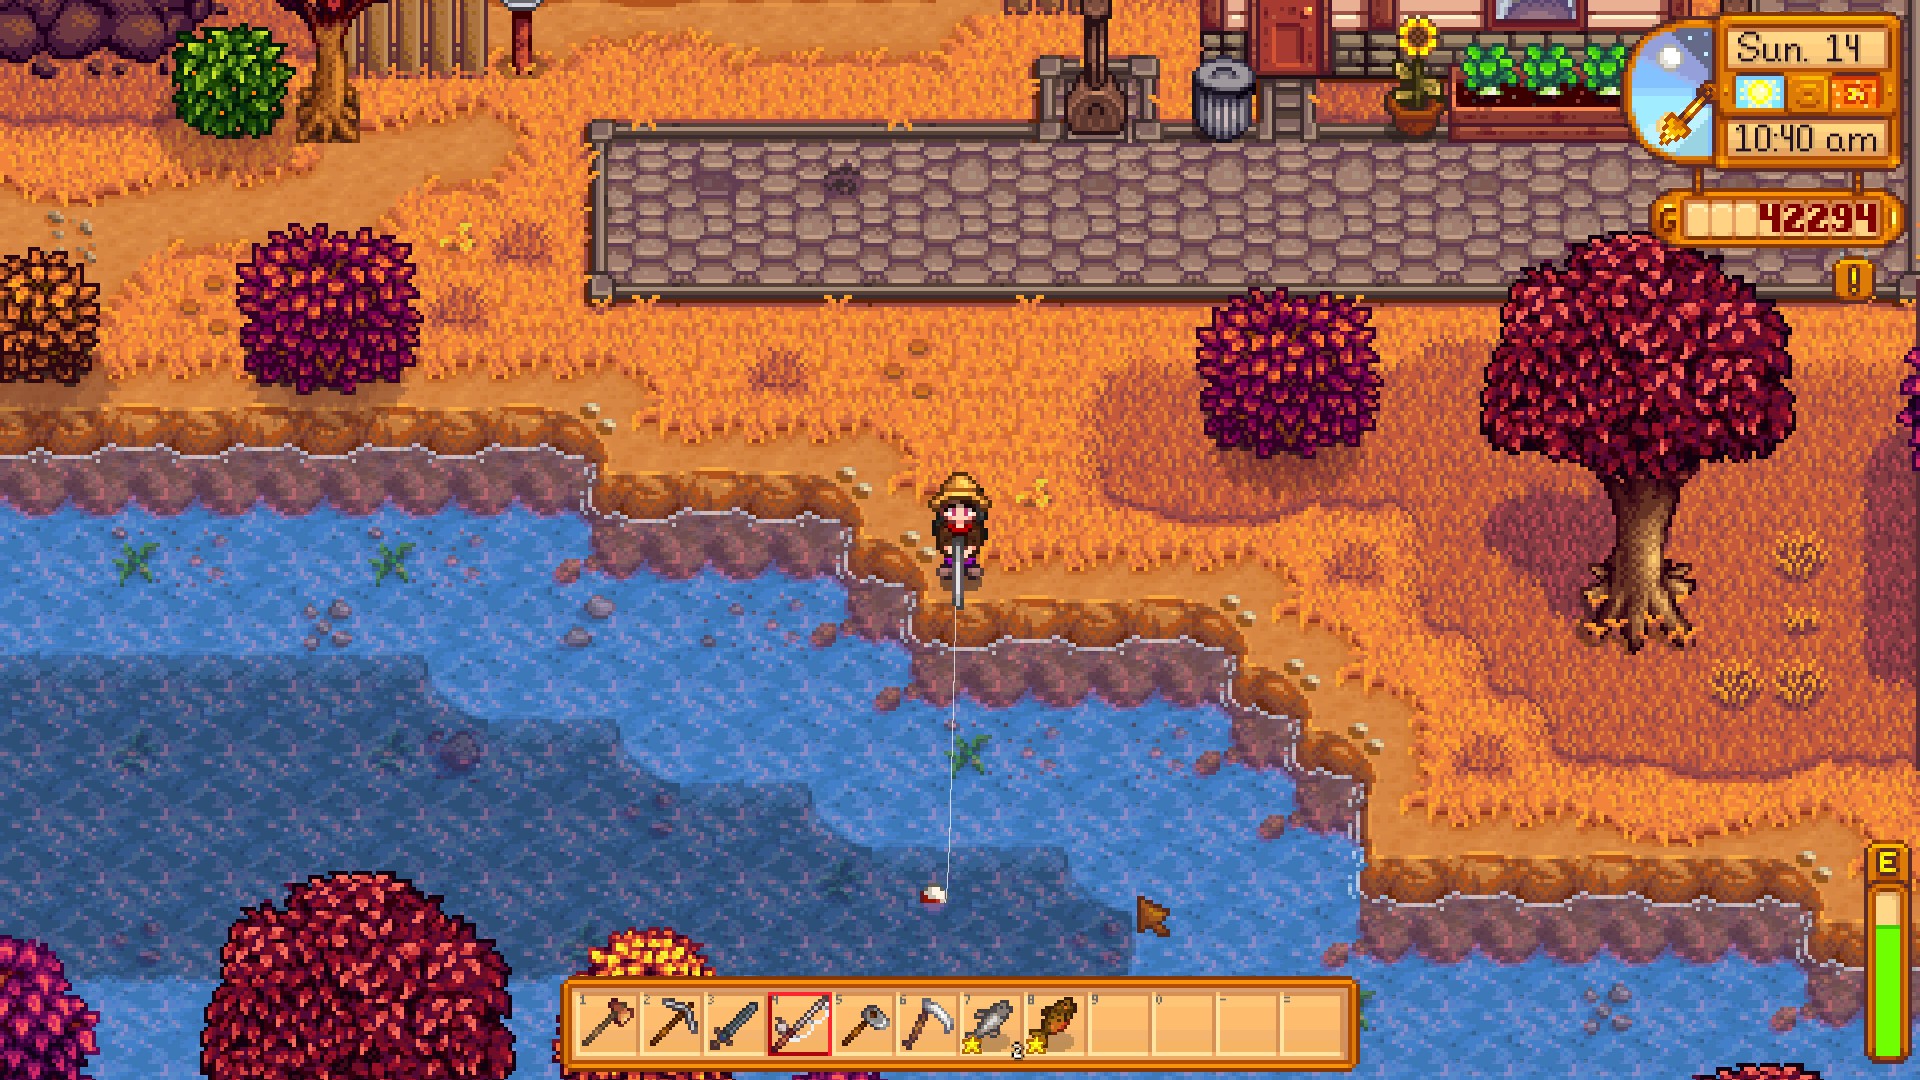 Valuable fishing spot in stardew valley